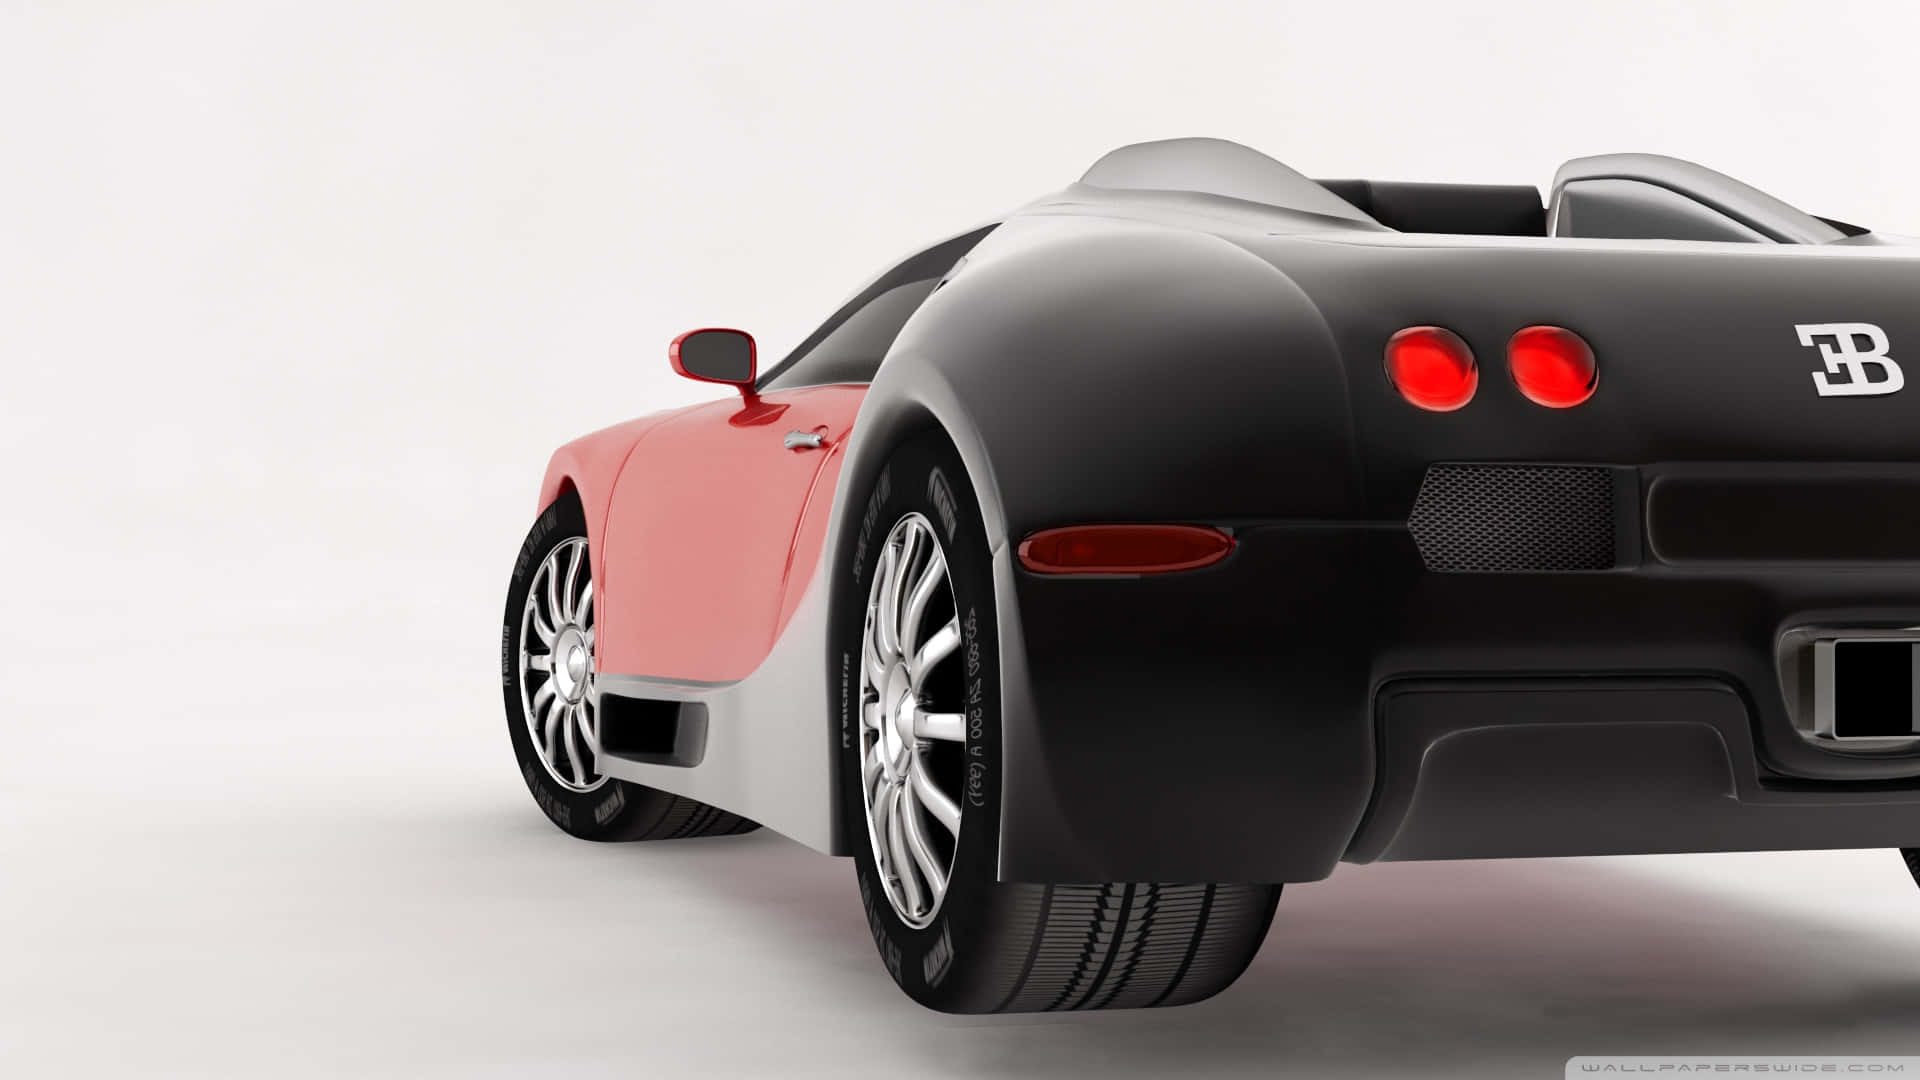 Speed and elegance combine in the iconic Bugatti Wallpaper